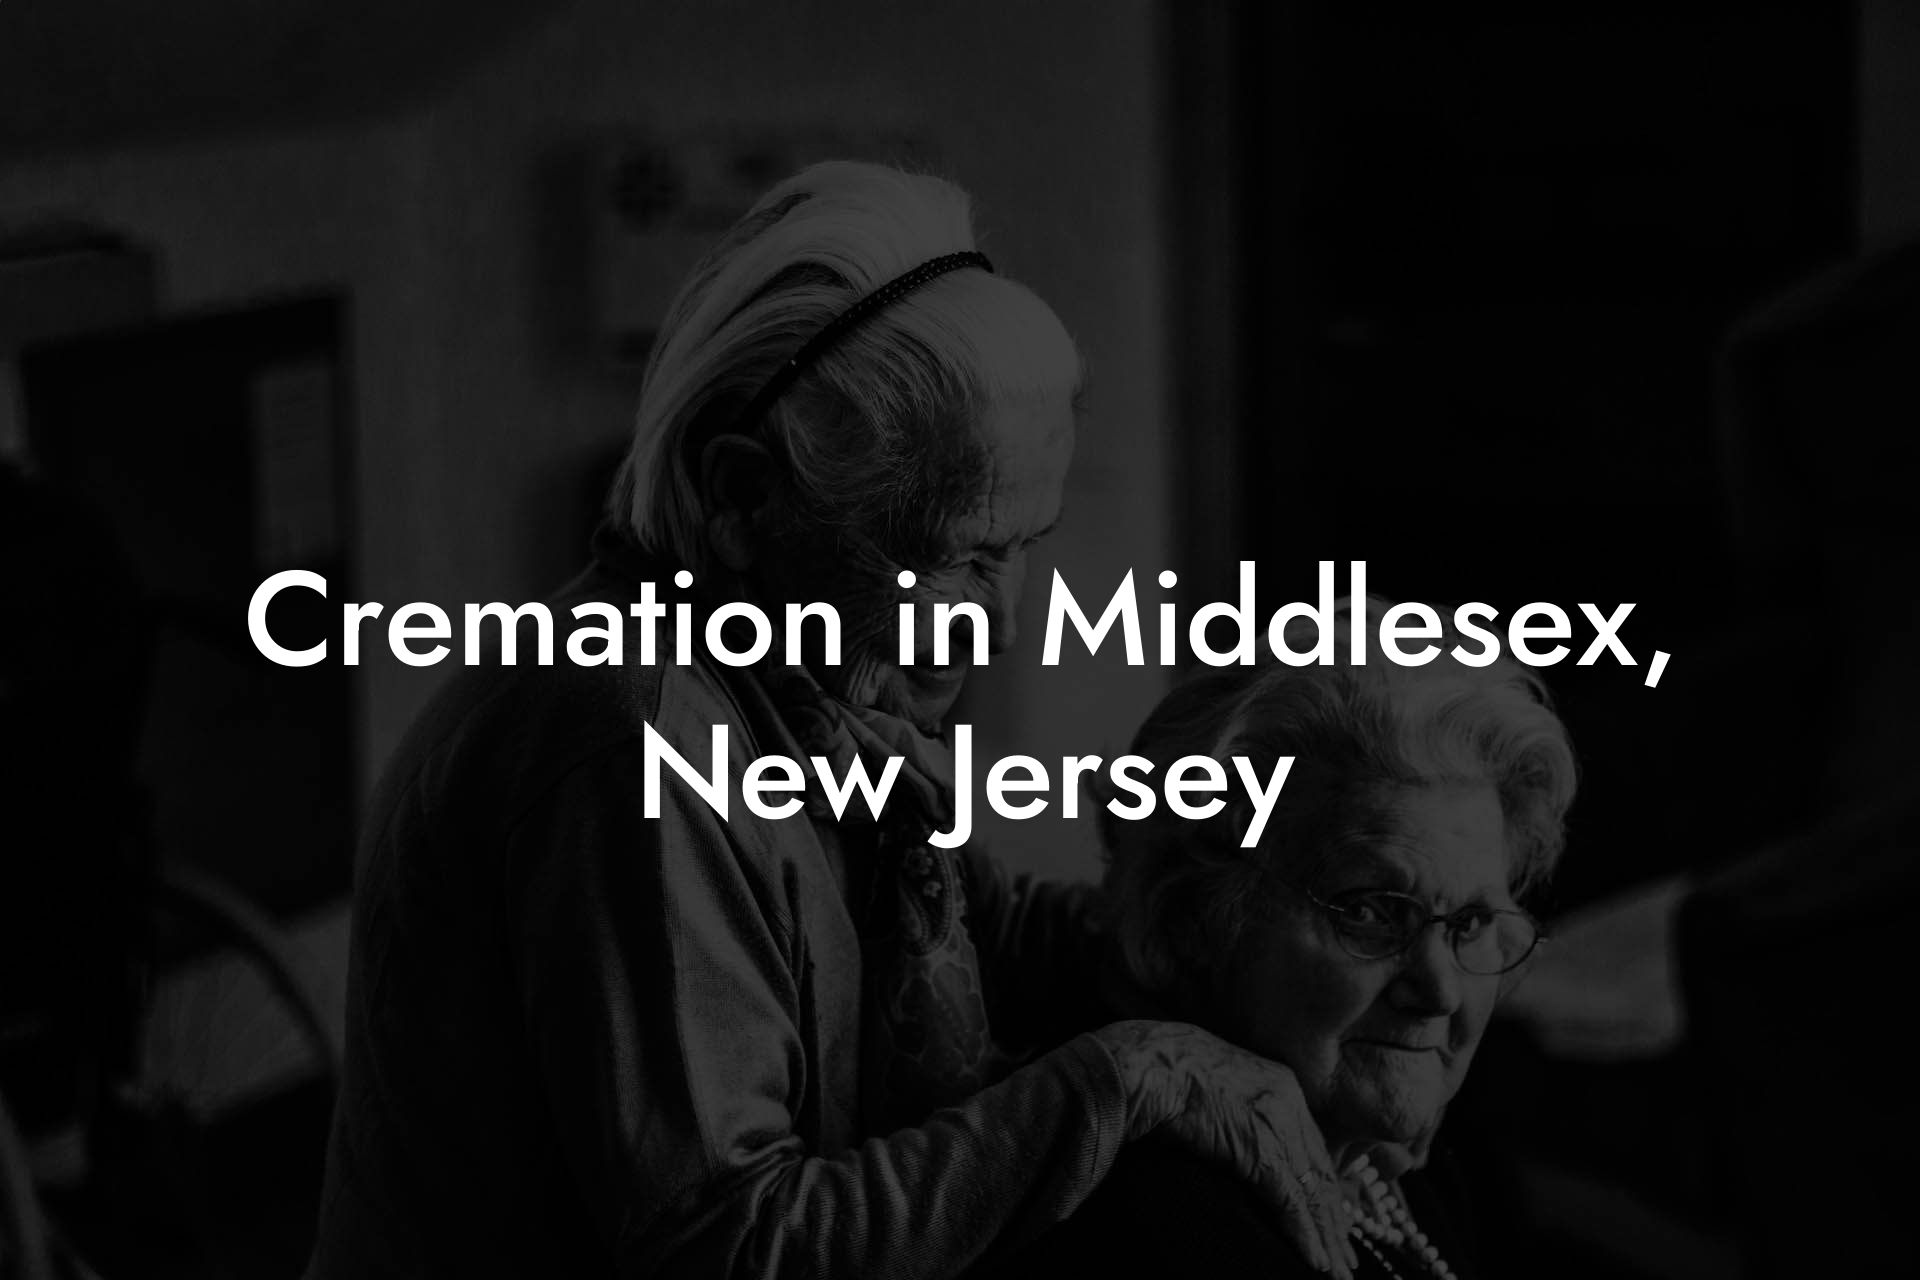 Cremation in Middlesex, New Jersey